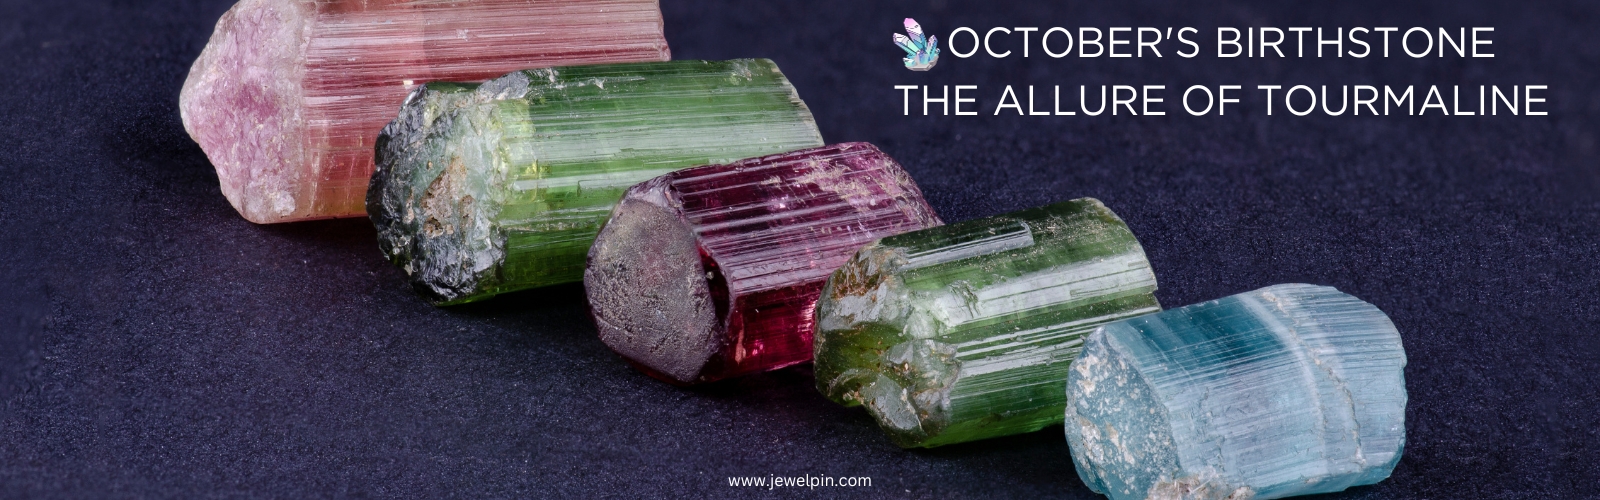 octobers birthstone the allure of tourmaline